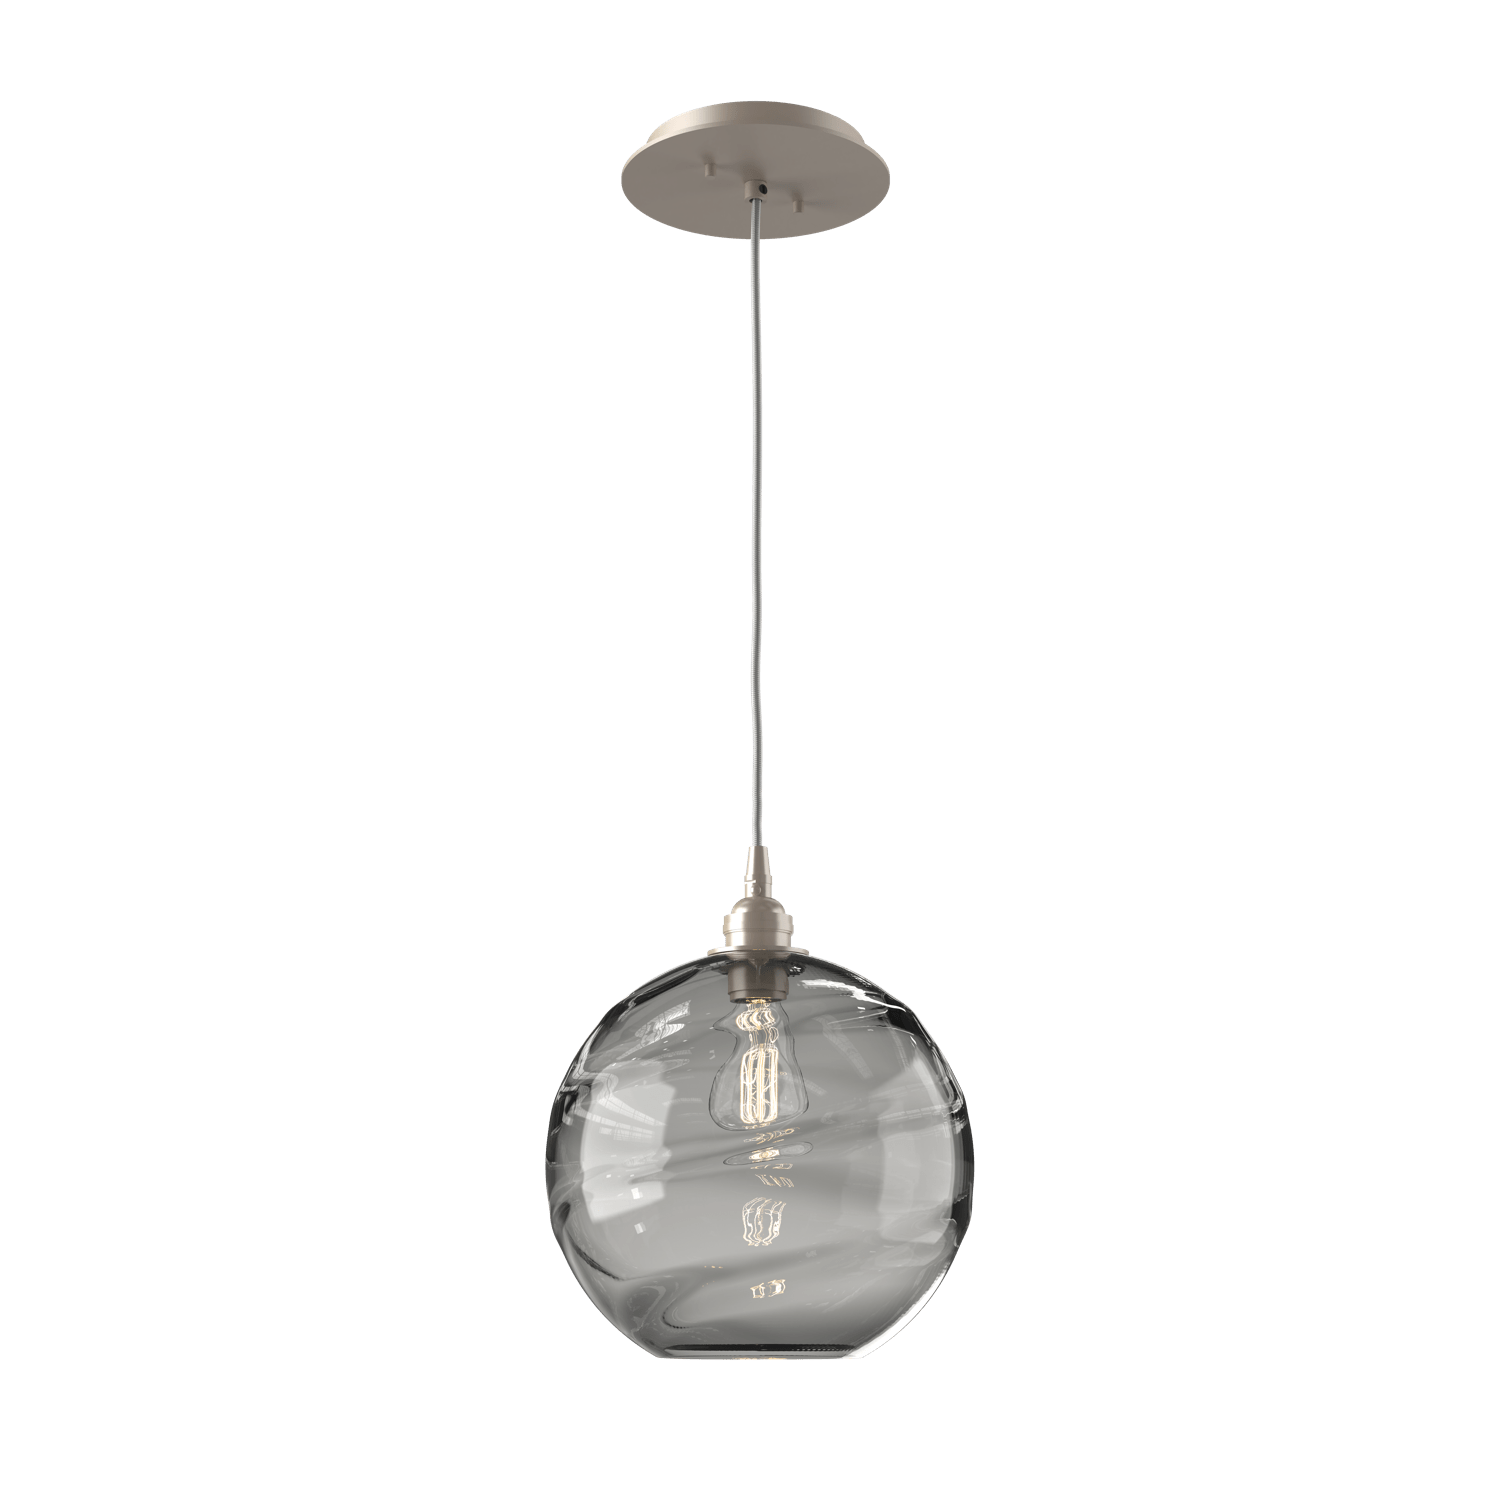 LAB0047-01-BS-OS-Hammerton-Studio-Optic-Blown-Glass-Terra-pendant-light-with-metallic-beige-silver-finish-and-optic-smoke-blown-glass-shades-and-incandescent-lamping